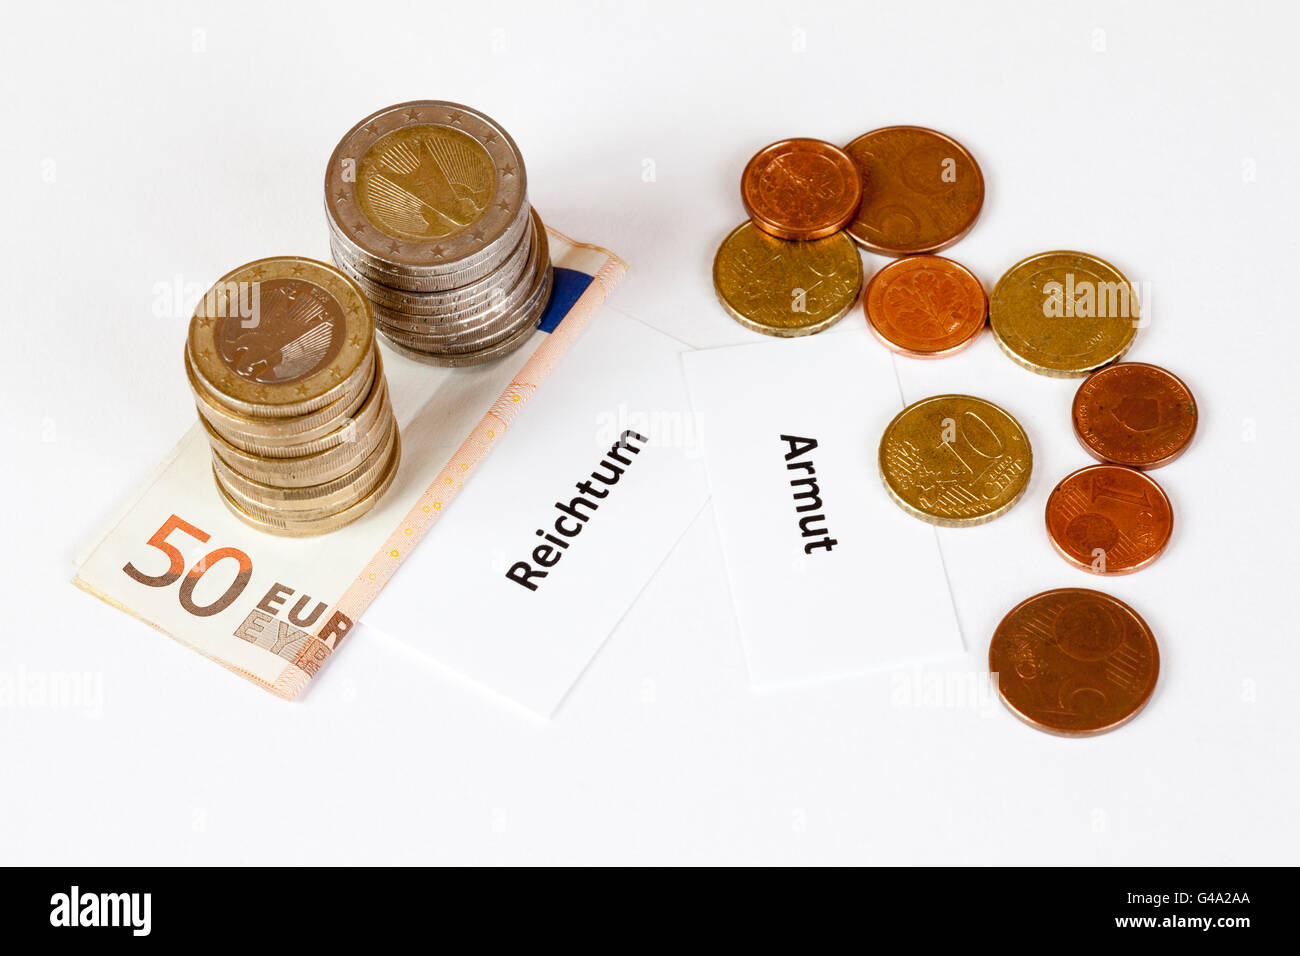 Signs 'Reichtum' and 'Armut', German for 'wealth' and 'poverty', stacked euro coins on euro banknotes Stock Photo